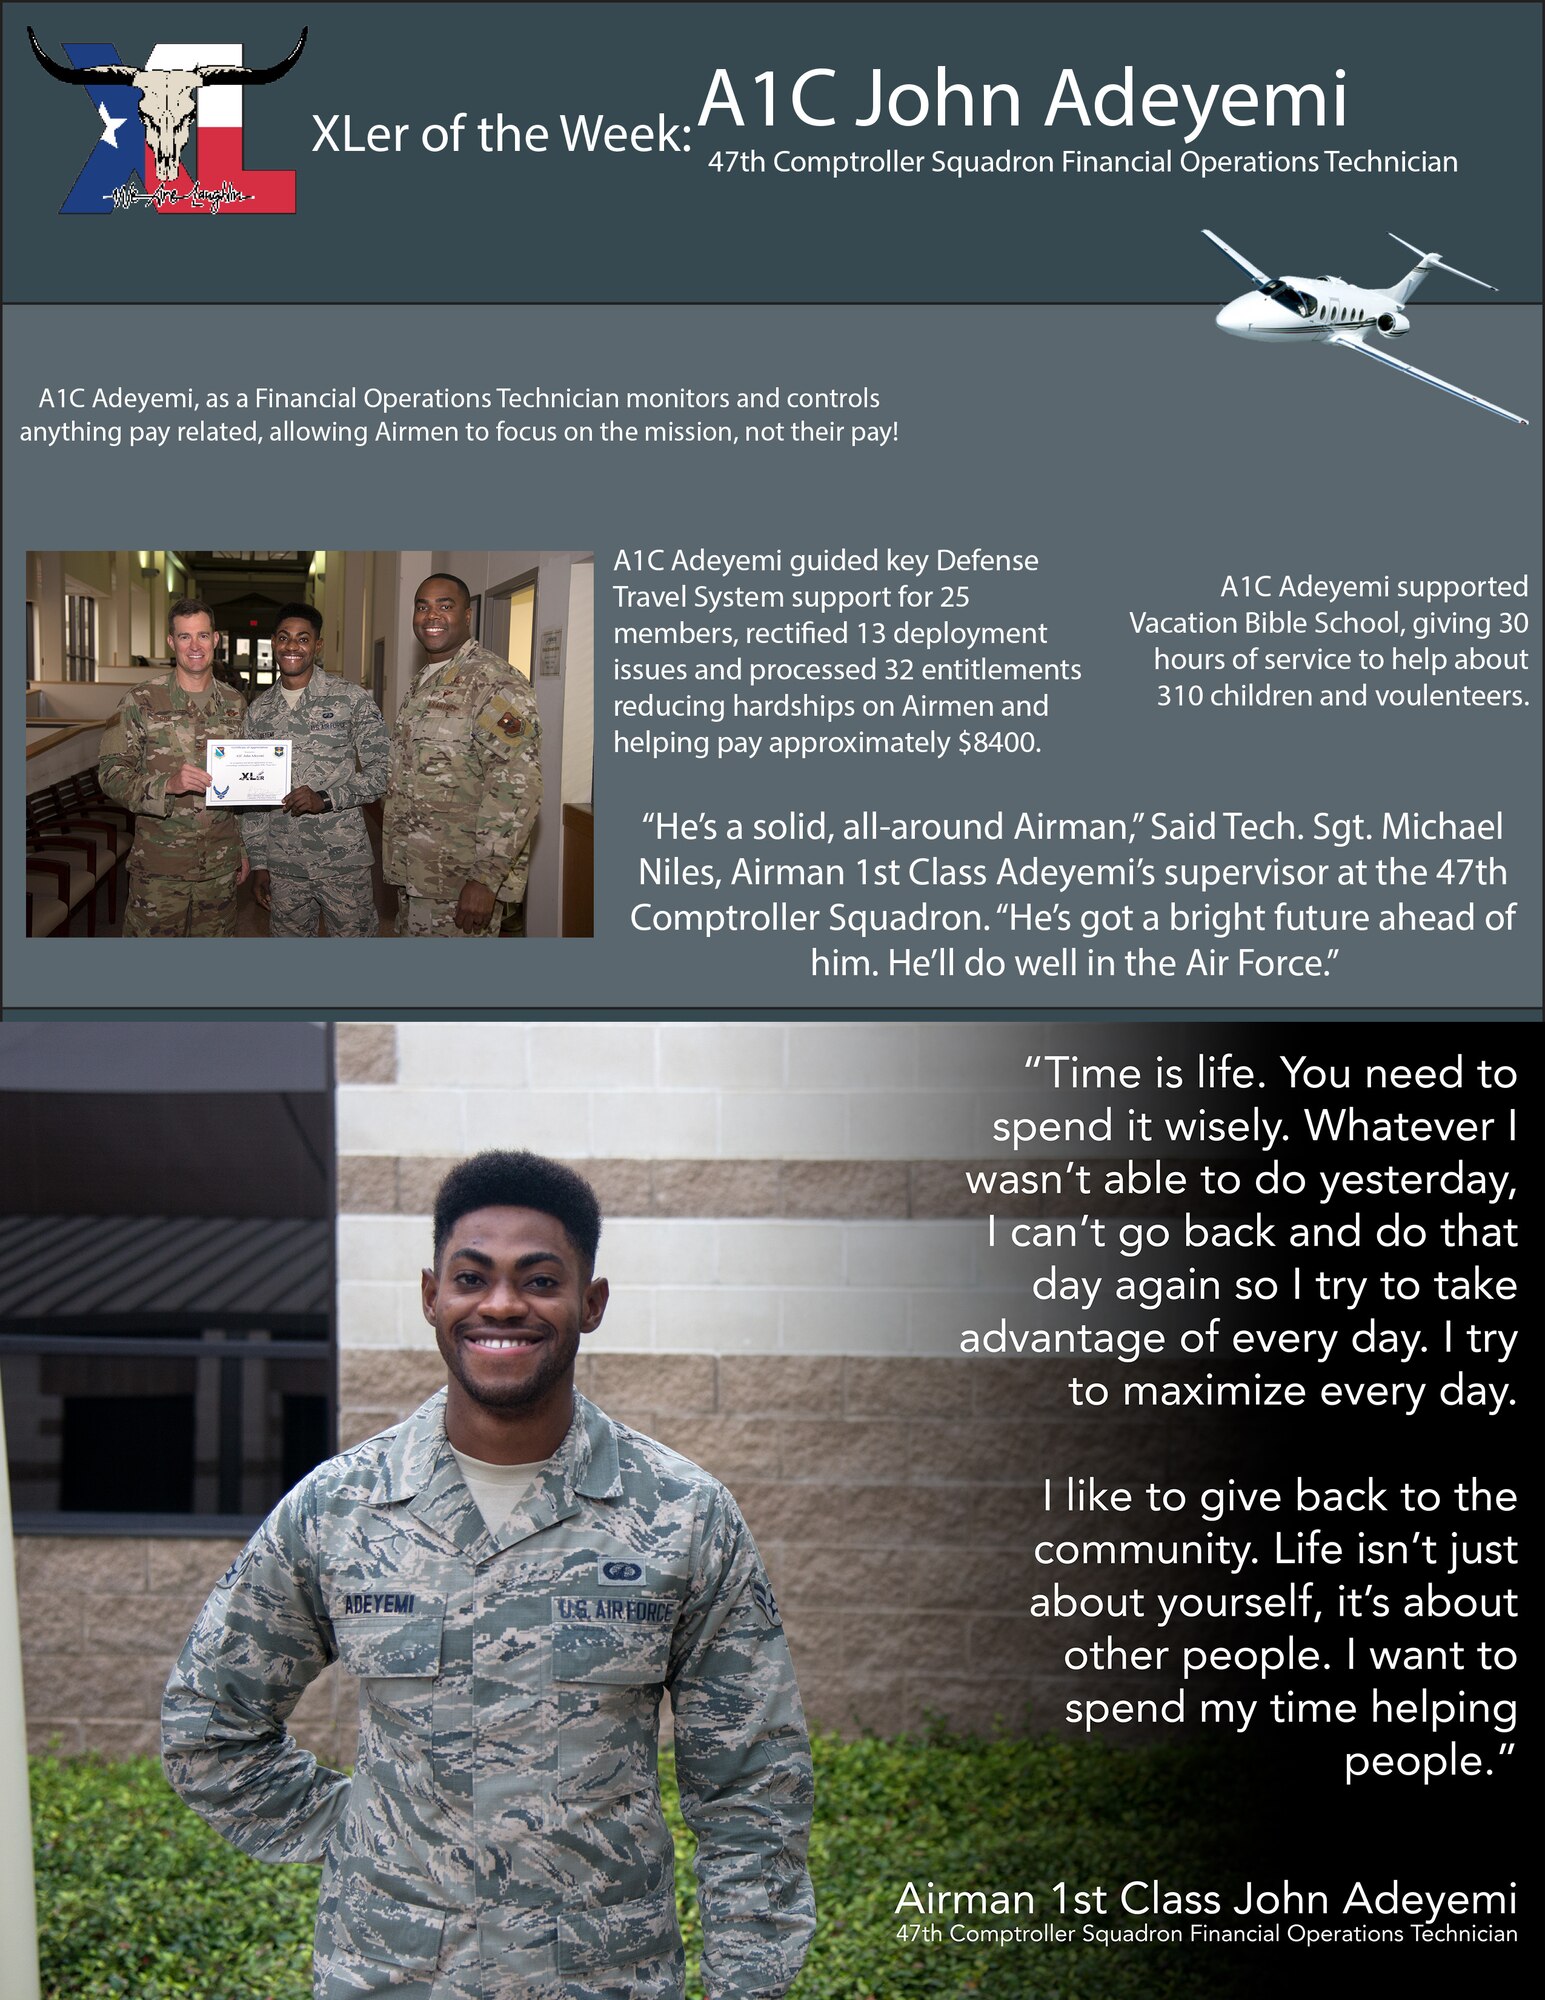 Airman 1st Class John Adeyemi, a 47th Comptroller Squadron financial operations technician, was chosen by wing leadership to be the “XLer of the Week” of Nov. 18, 2019 at Laughlin Air Force Base, Texas. Adeyemi was chosen by wing leadership to be the “XLer of the Week” of Nov. 18, 2019. (U.S. Air Force graphic by Senior Airman John A. Crawford)